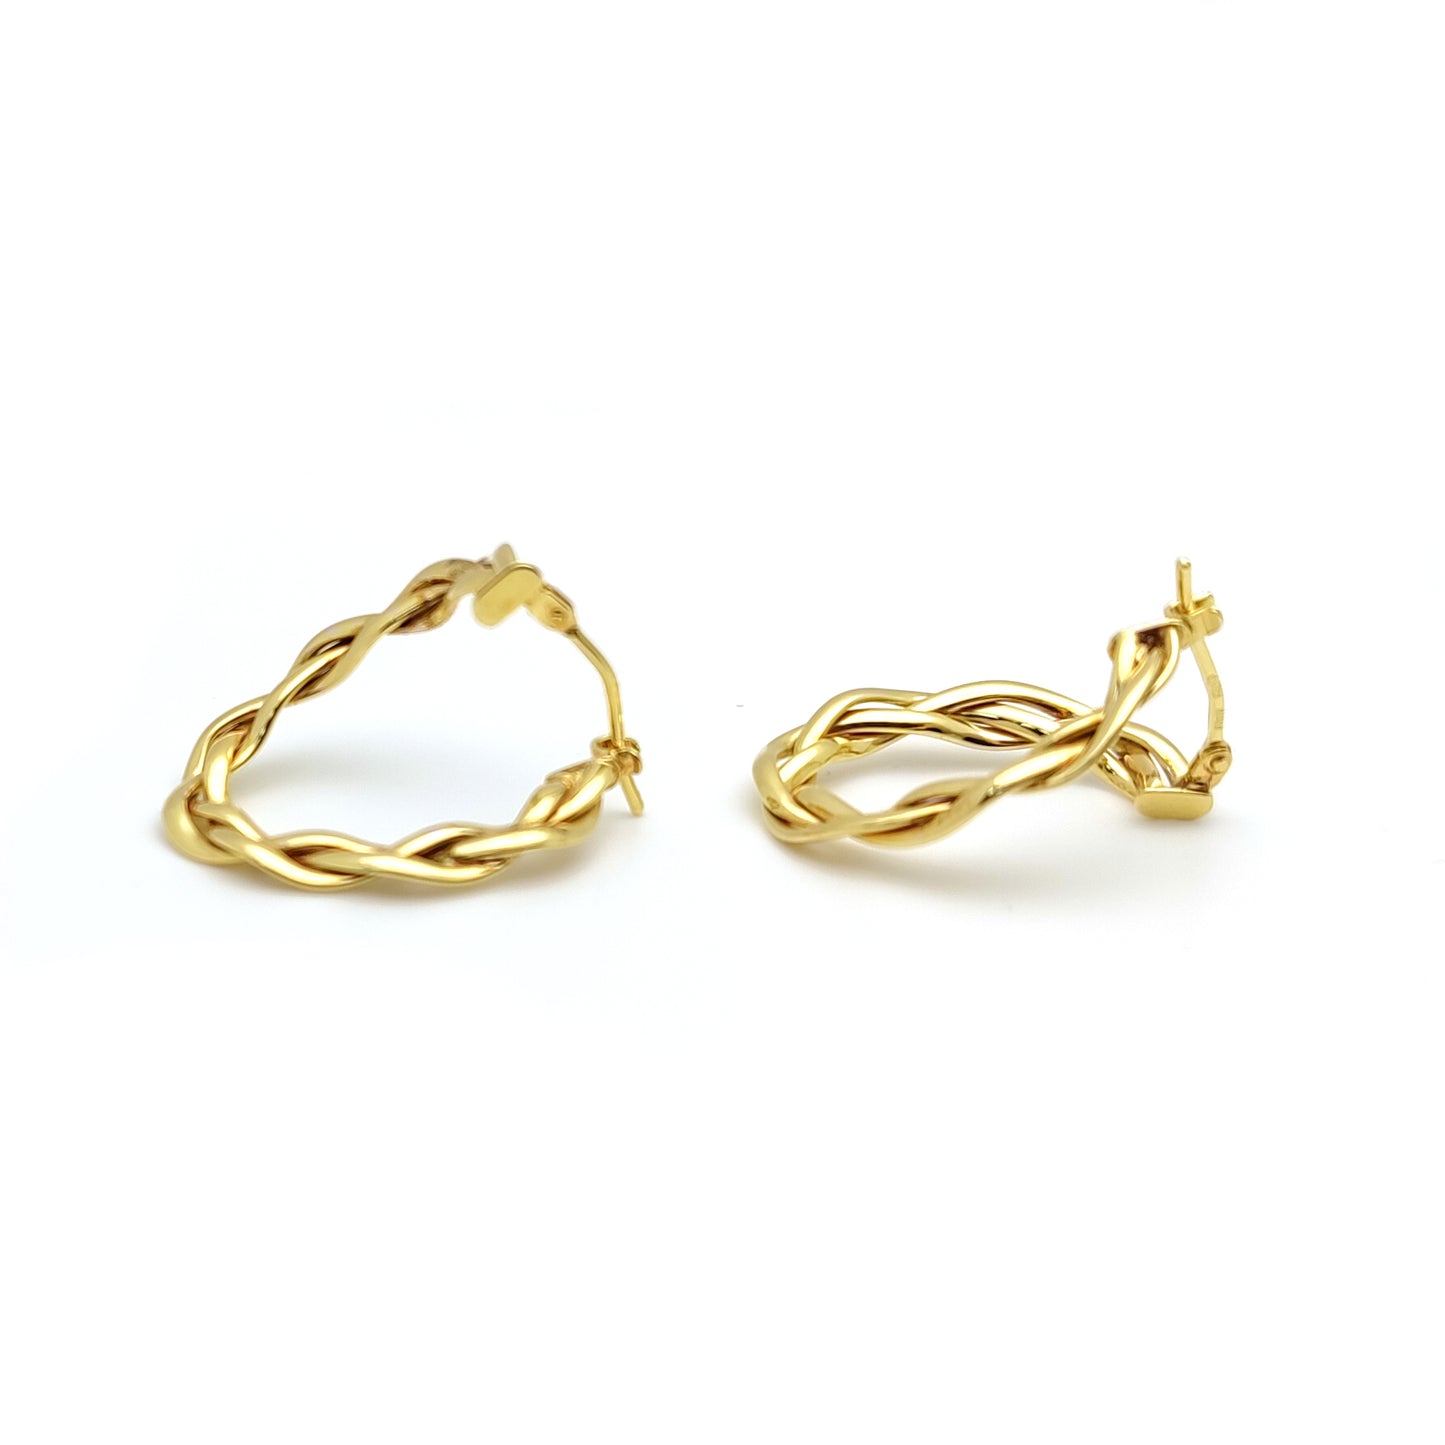 9ct Gold  Plaited "Front and Back" Oval Hoop Earrings - ERNR02143